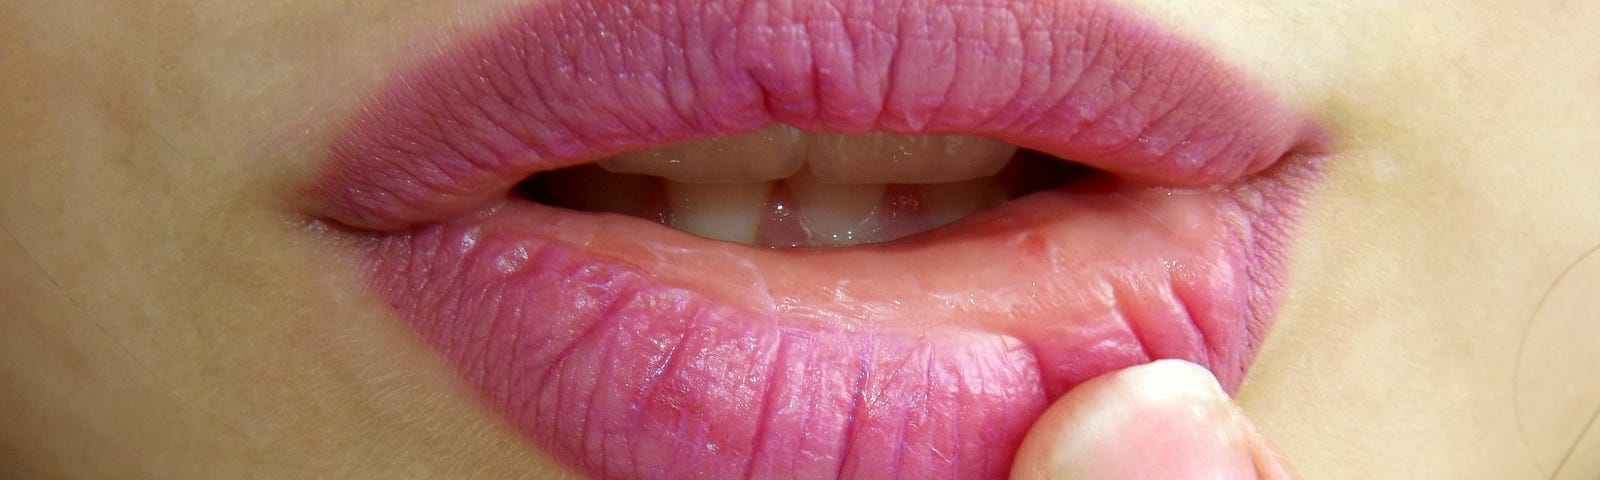 A portrait of a woman’s lips with a finger gently pulling on the bottom one.